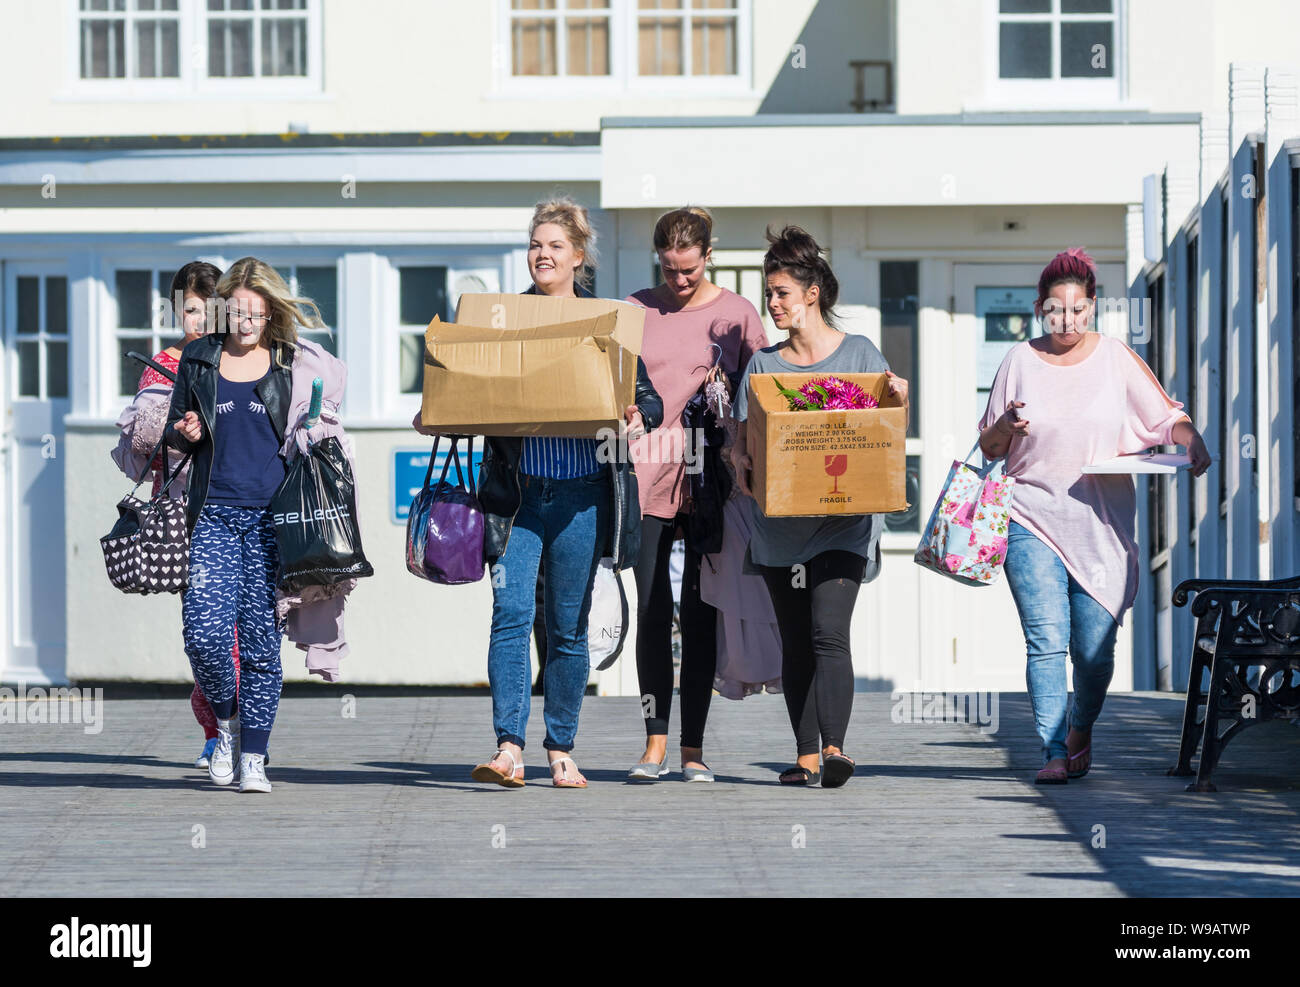 Group of young women or teenagers walking while carrying boxes, probably going to an event or party. Stock Photo